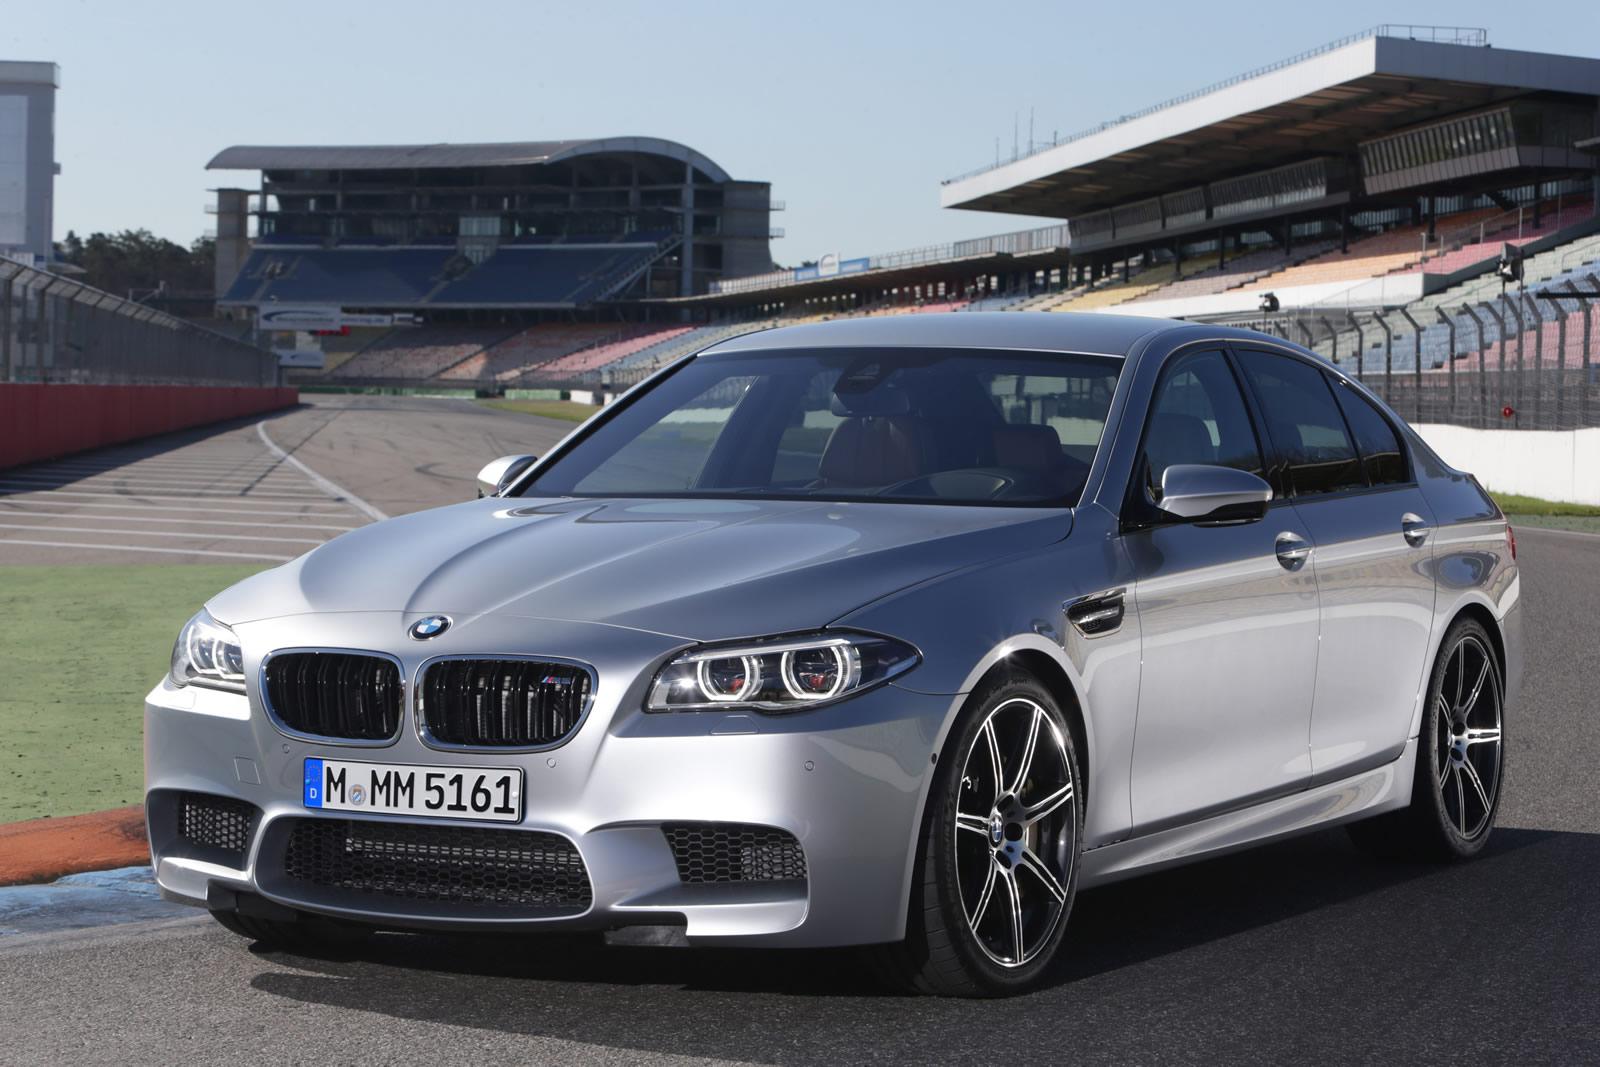 2014 BMW M5 and M6 revealed, with optional Competition Package